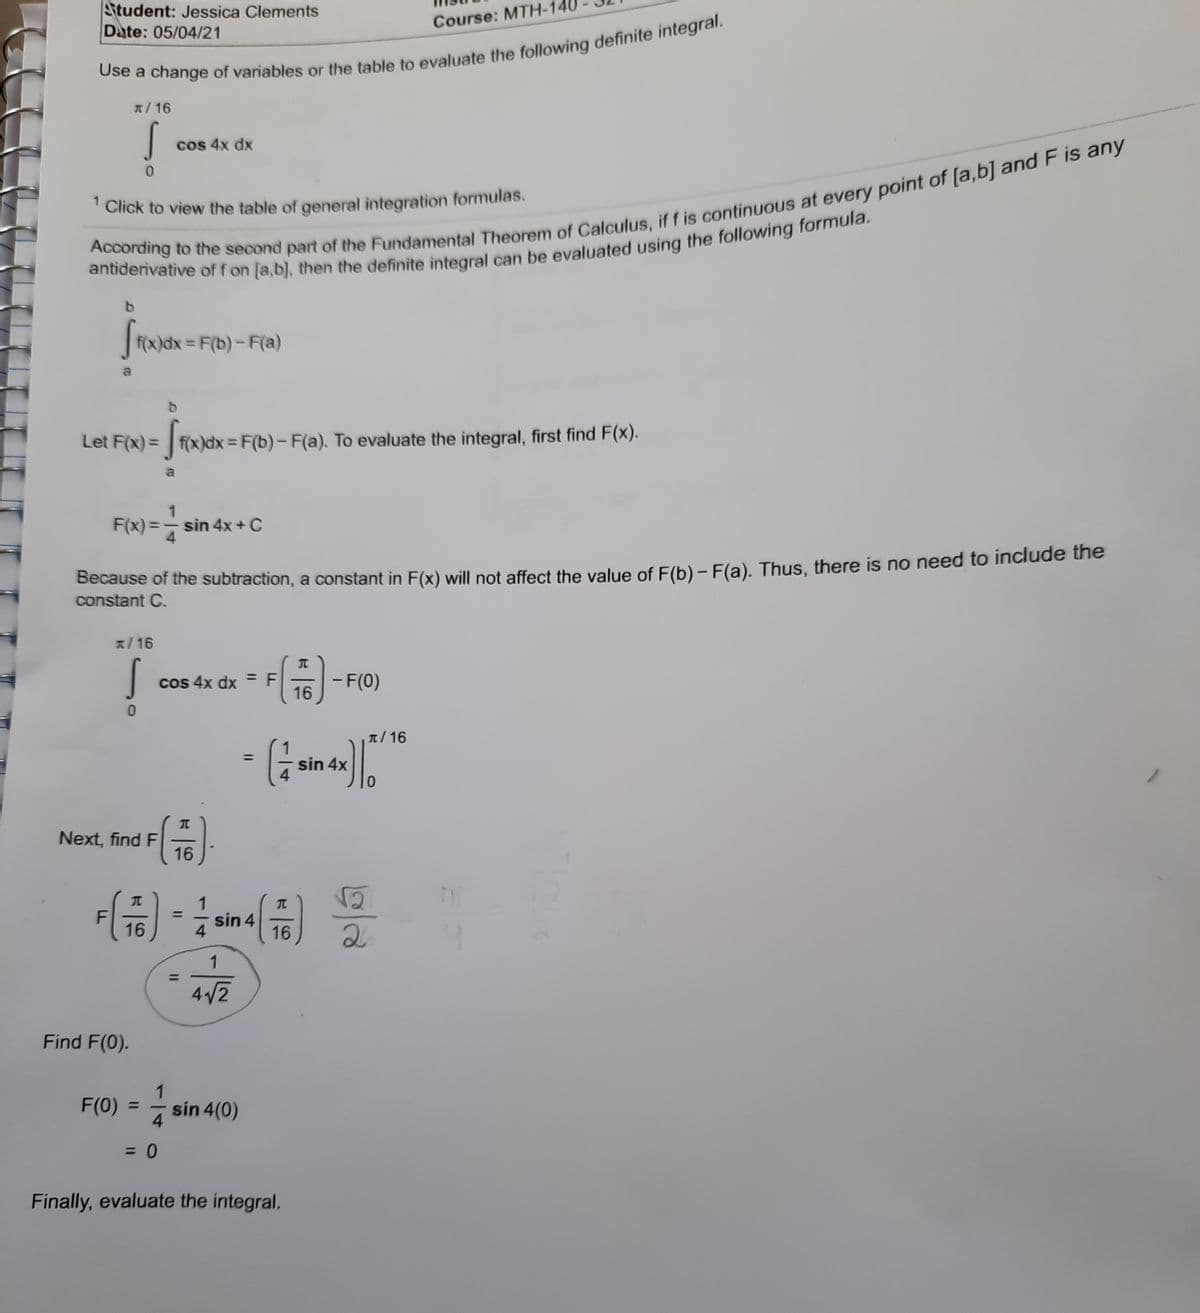 Student: Jessica Clements
Date: 05/04/21
Course: MTH-14
n/16
cos 4x dx
'Click to view the table of general integration formulas.
F(x)dx = F(b)-F(a)
a
Let F(x) = f(x)dx = F(b) - F(a). To evaluate the integral, first find F(x).
%3D
F(x) =- sin 4x+ C
4.
Because of the subtraction, a constant in F(x) will not affect the value of E(b)- F(a). Thus, there is no need to include the
constant C.
1/16
cos 4x dx =F
16
- F(0)
%3D
T/16
1
sin 4x
%3D
Next, find F
16
금)
1
%3D
F
16
sin 4
4.
16
2
1
4/2
Find F(0).
1
sin 4(0)
F(0)
%D
4
= 0
Finally, evaluate the integral.
%3D
